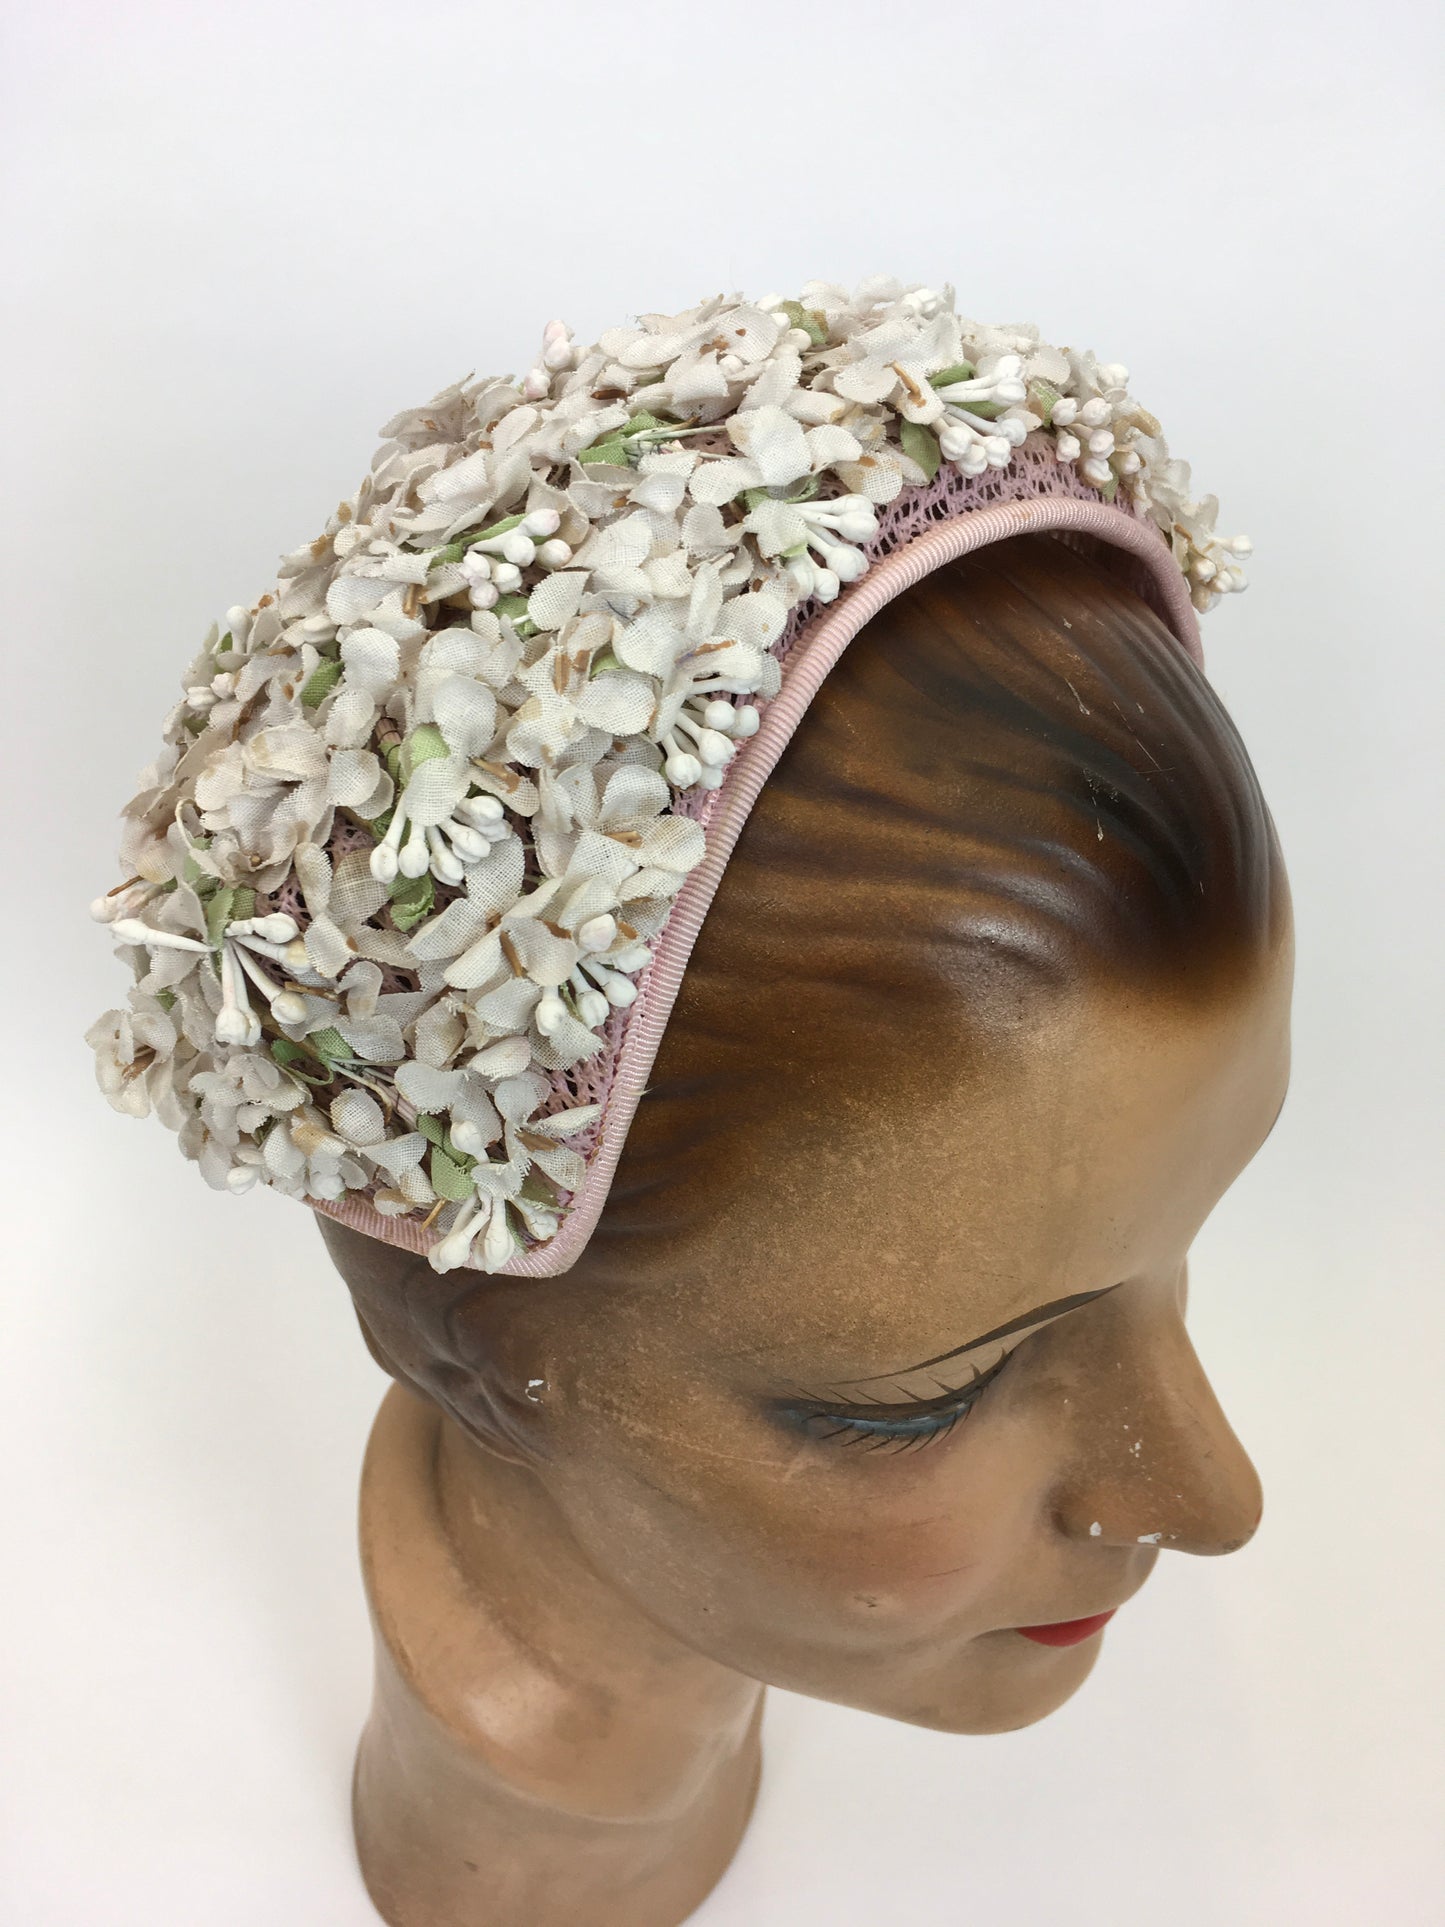 Original 1950s Darling ‘ Marten’ Hat - Made in A Dusky Pink with Ivory Florals and Soft Green Leaves